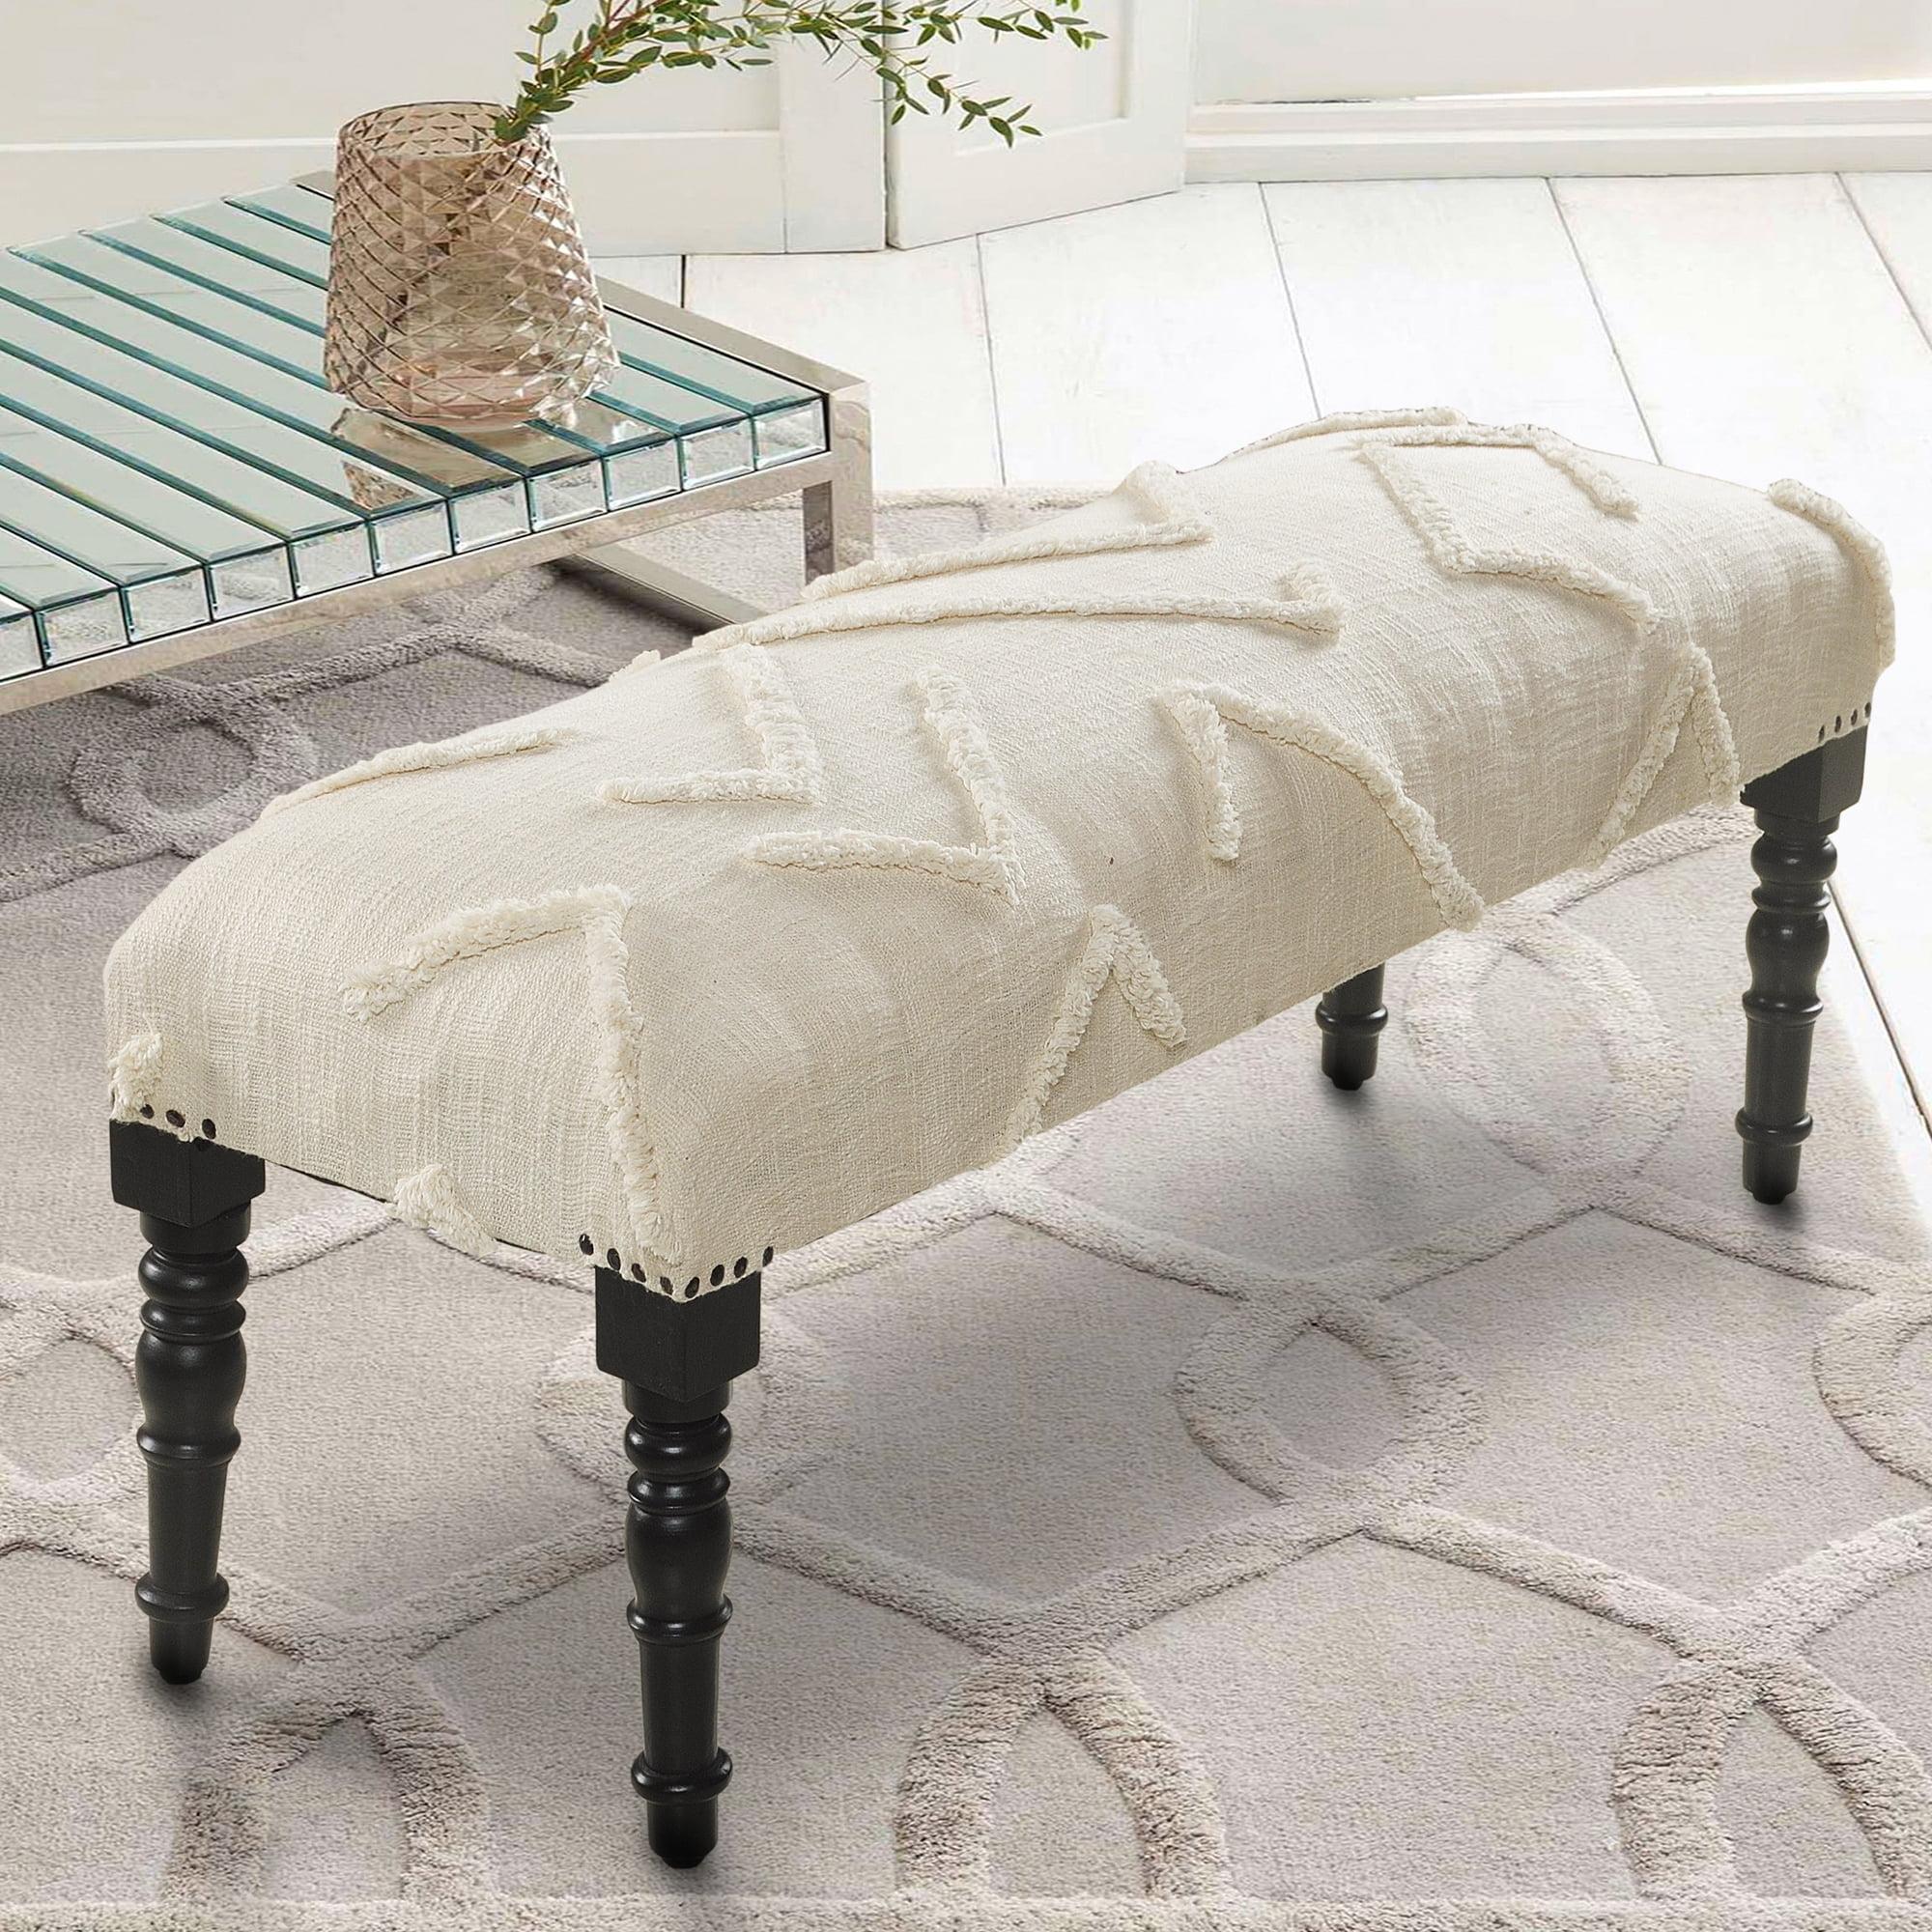 Elegant Cream Tufted Cotton Bench with Wooden Legs, 47"